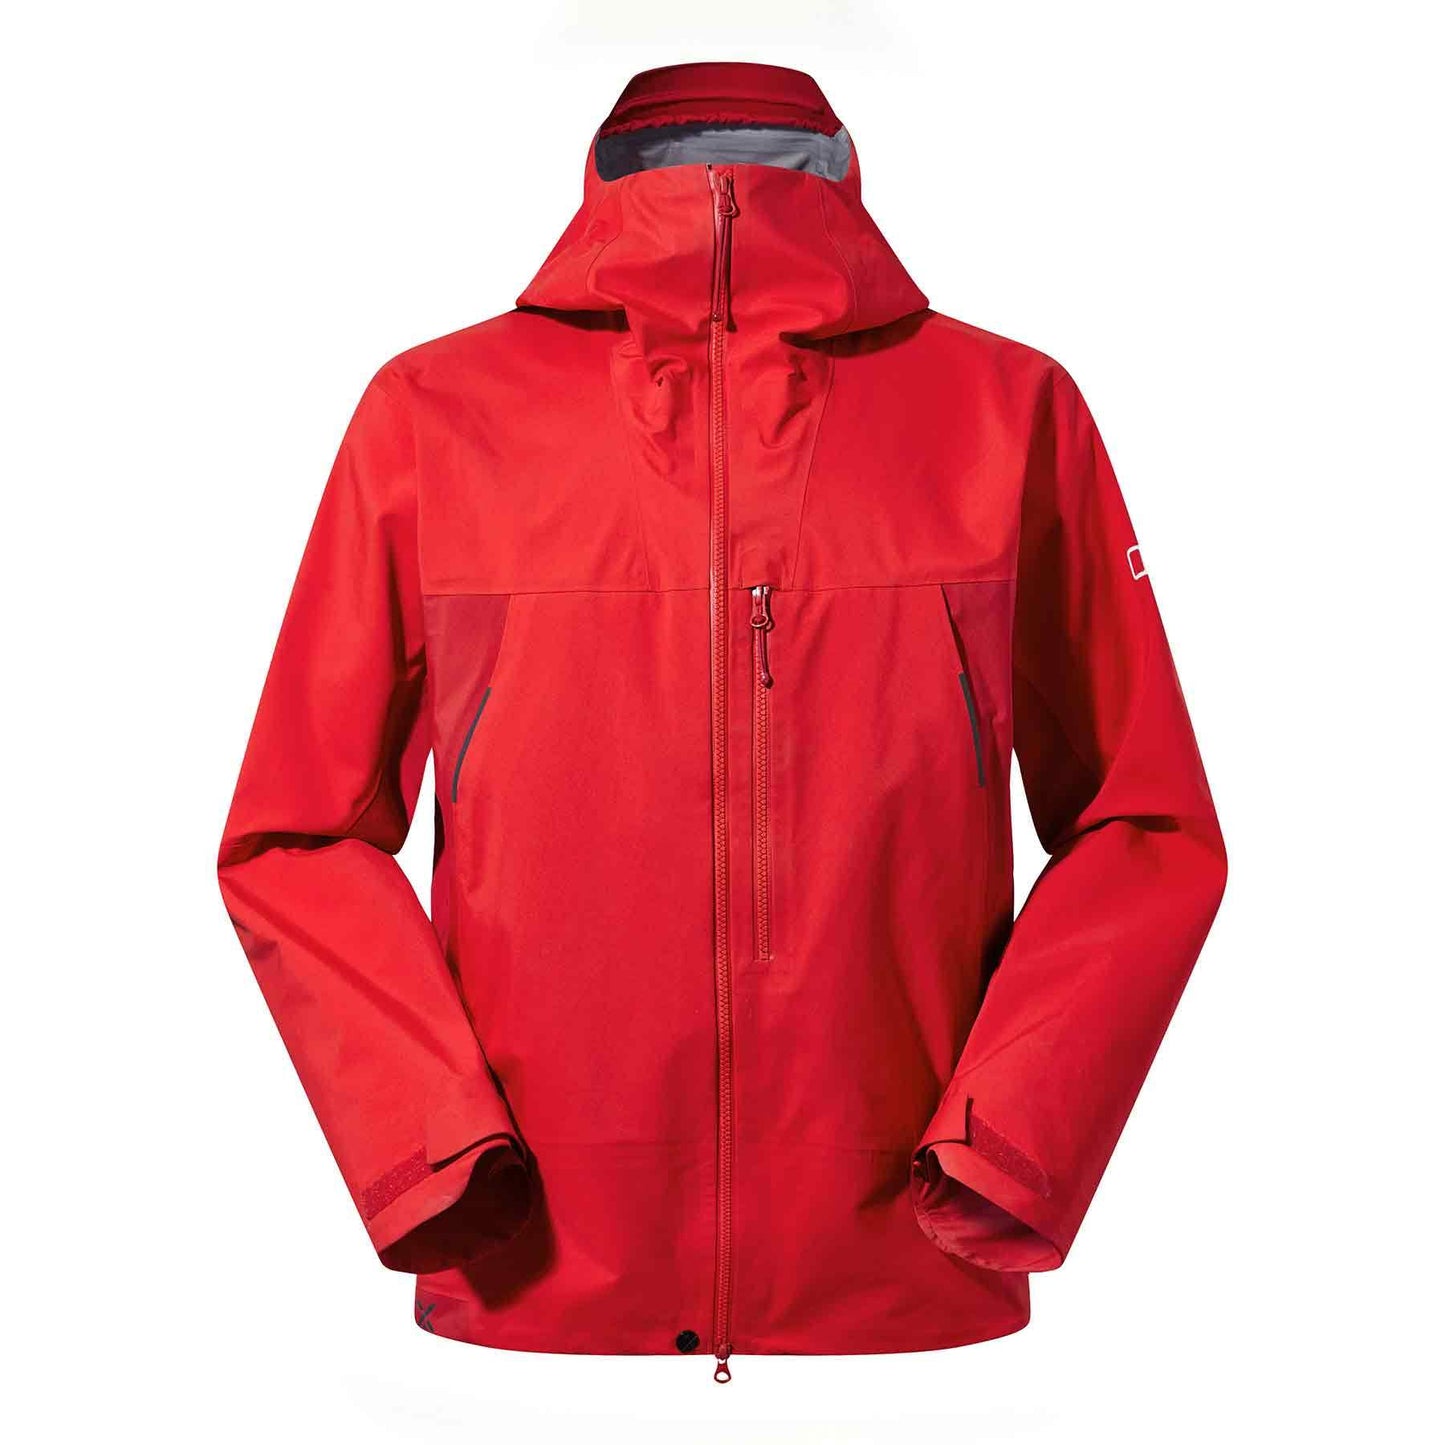 Berghaus Extrem Men's MTN Guide GTX Pro Jacket - The Luxury Promotional Gifts Company Limited